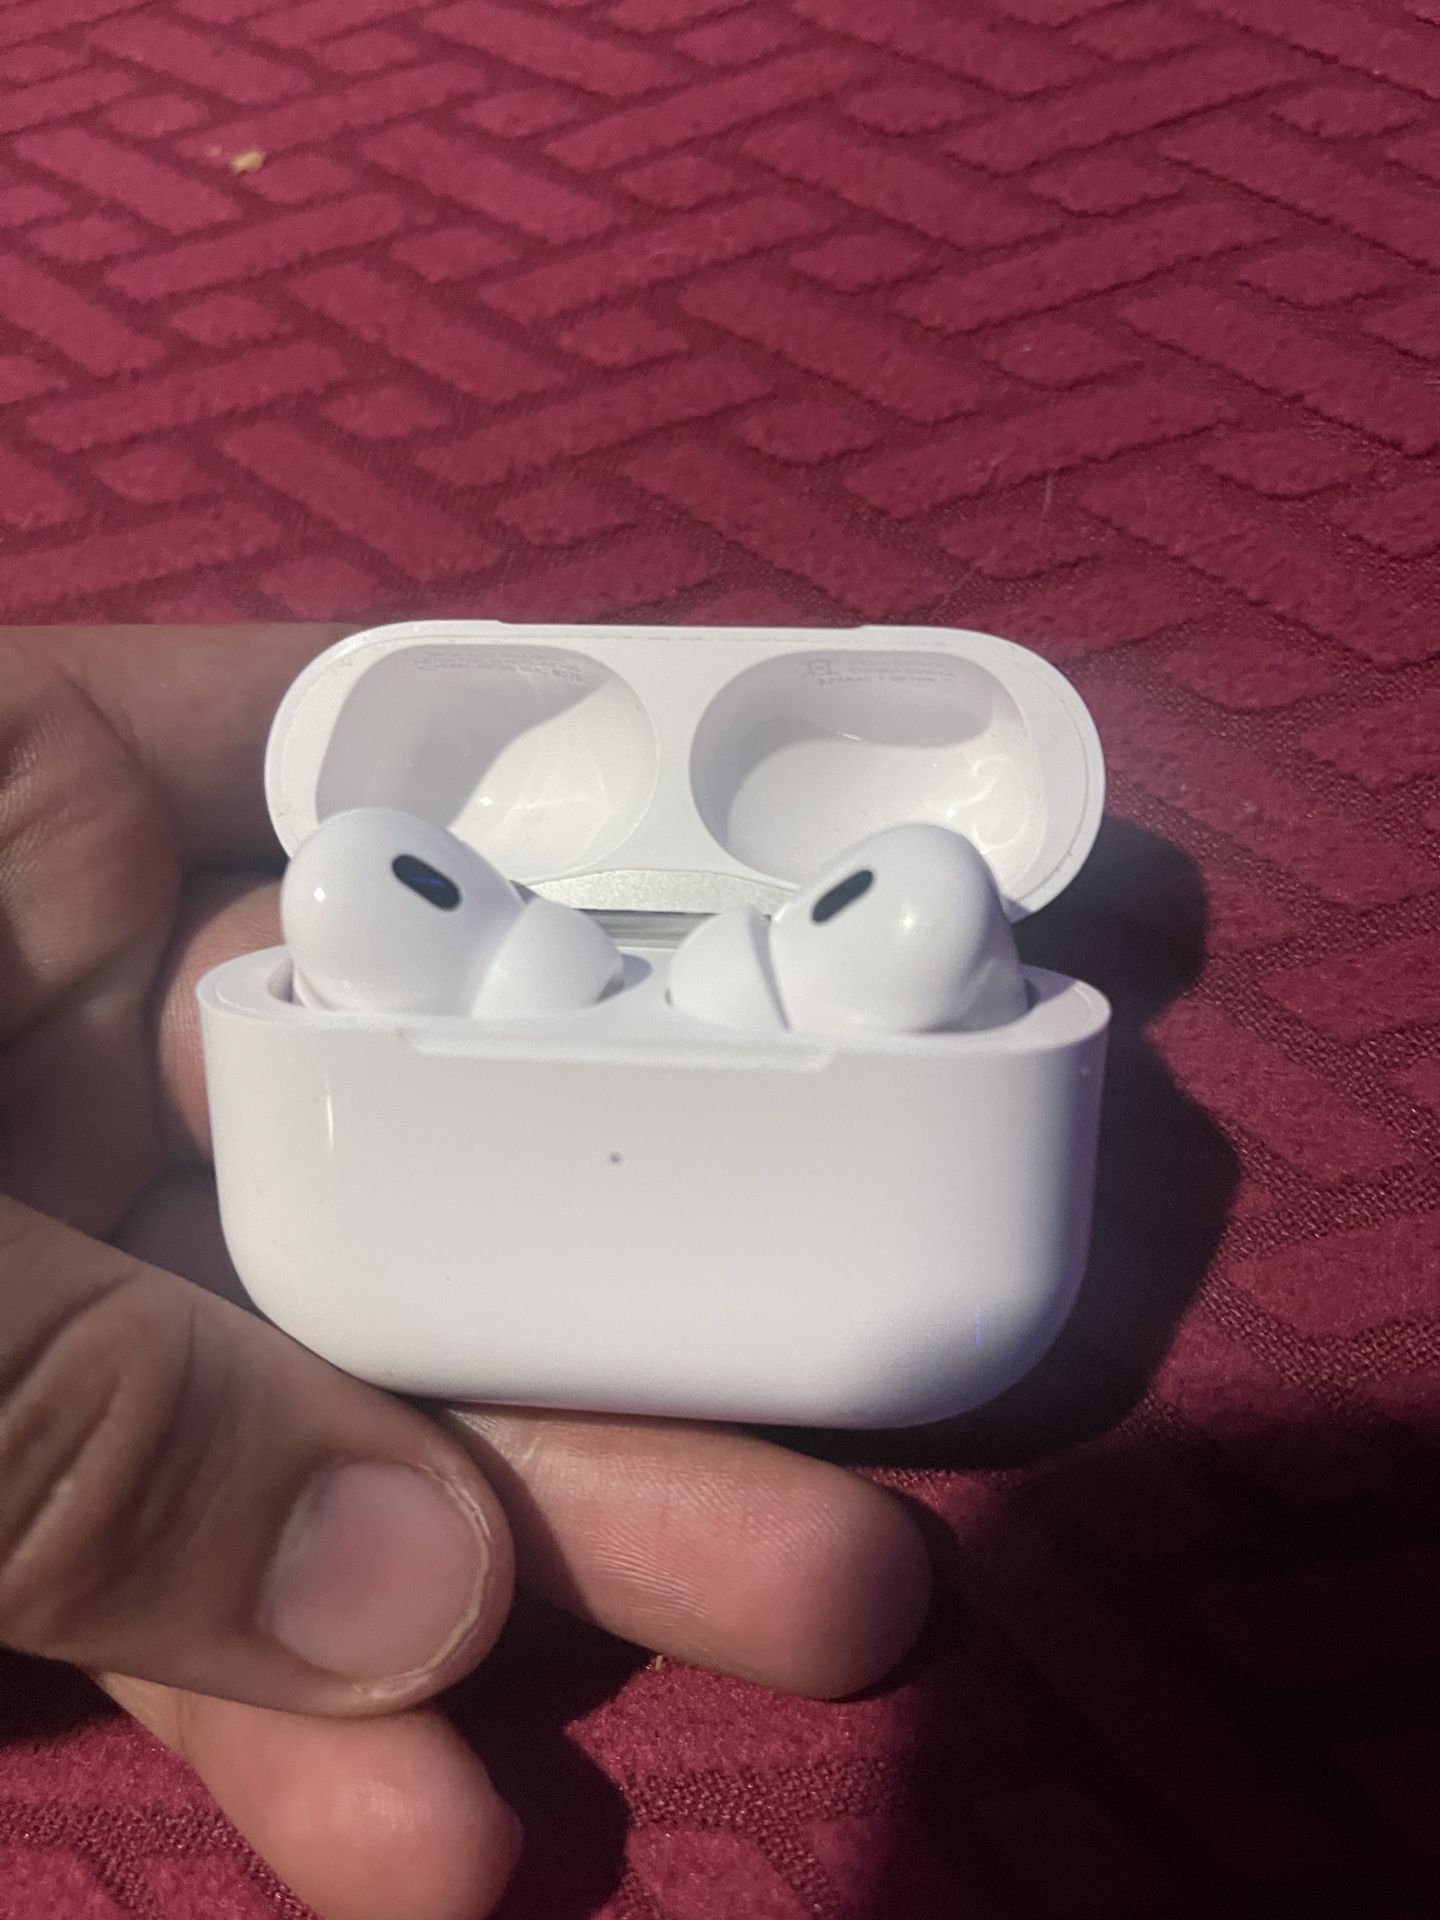 AirPods Pro Newest Model 